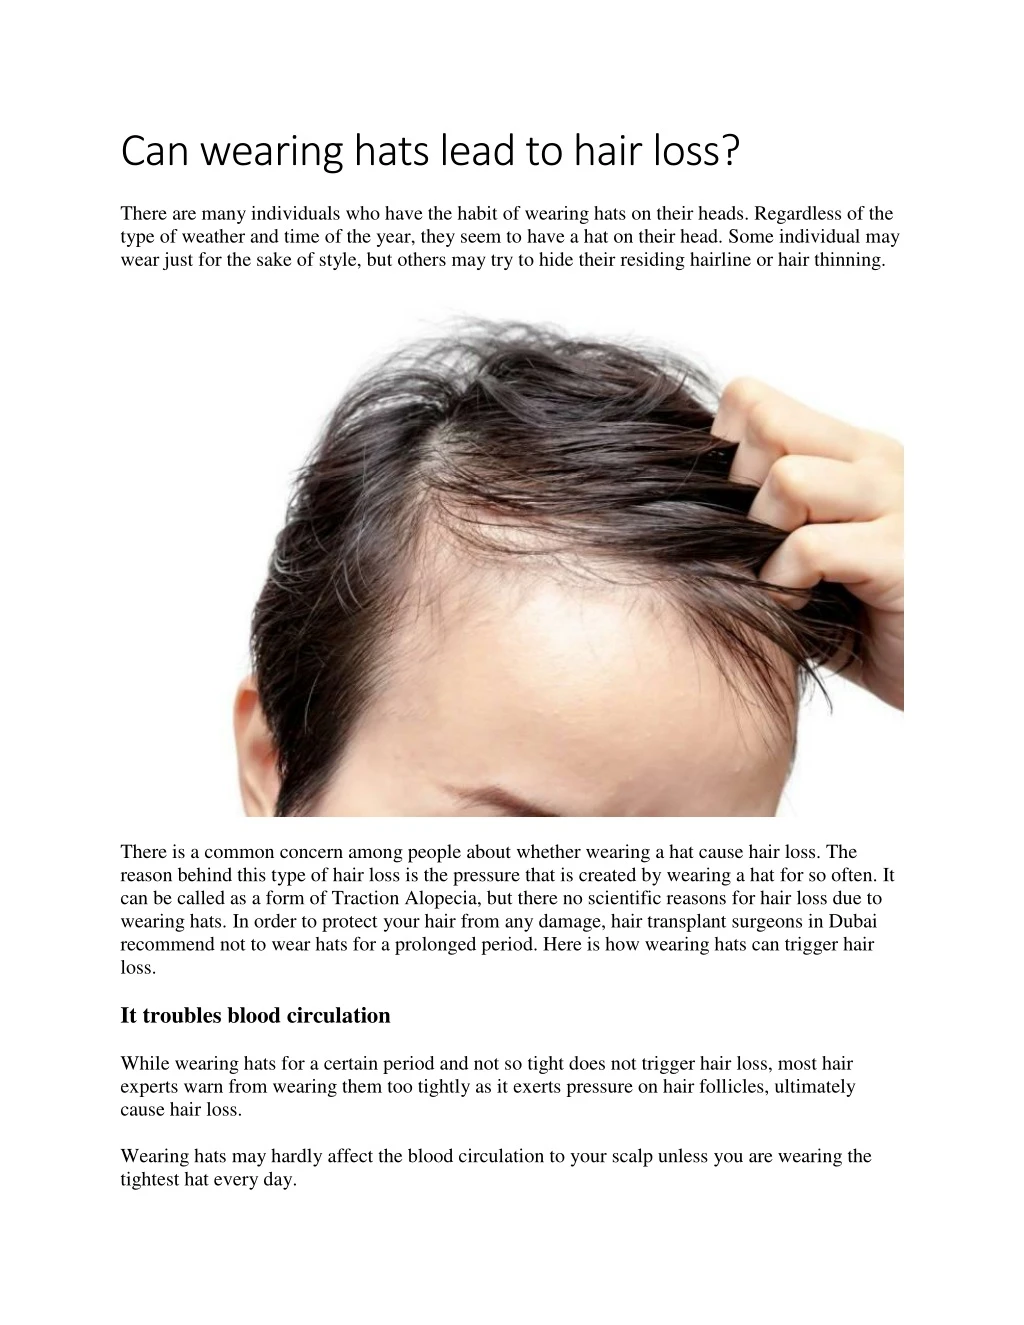 can wearing hats lead to hair loss